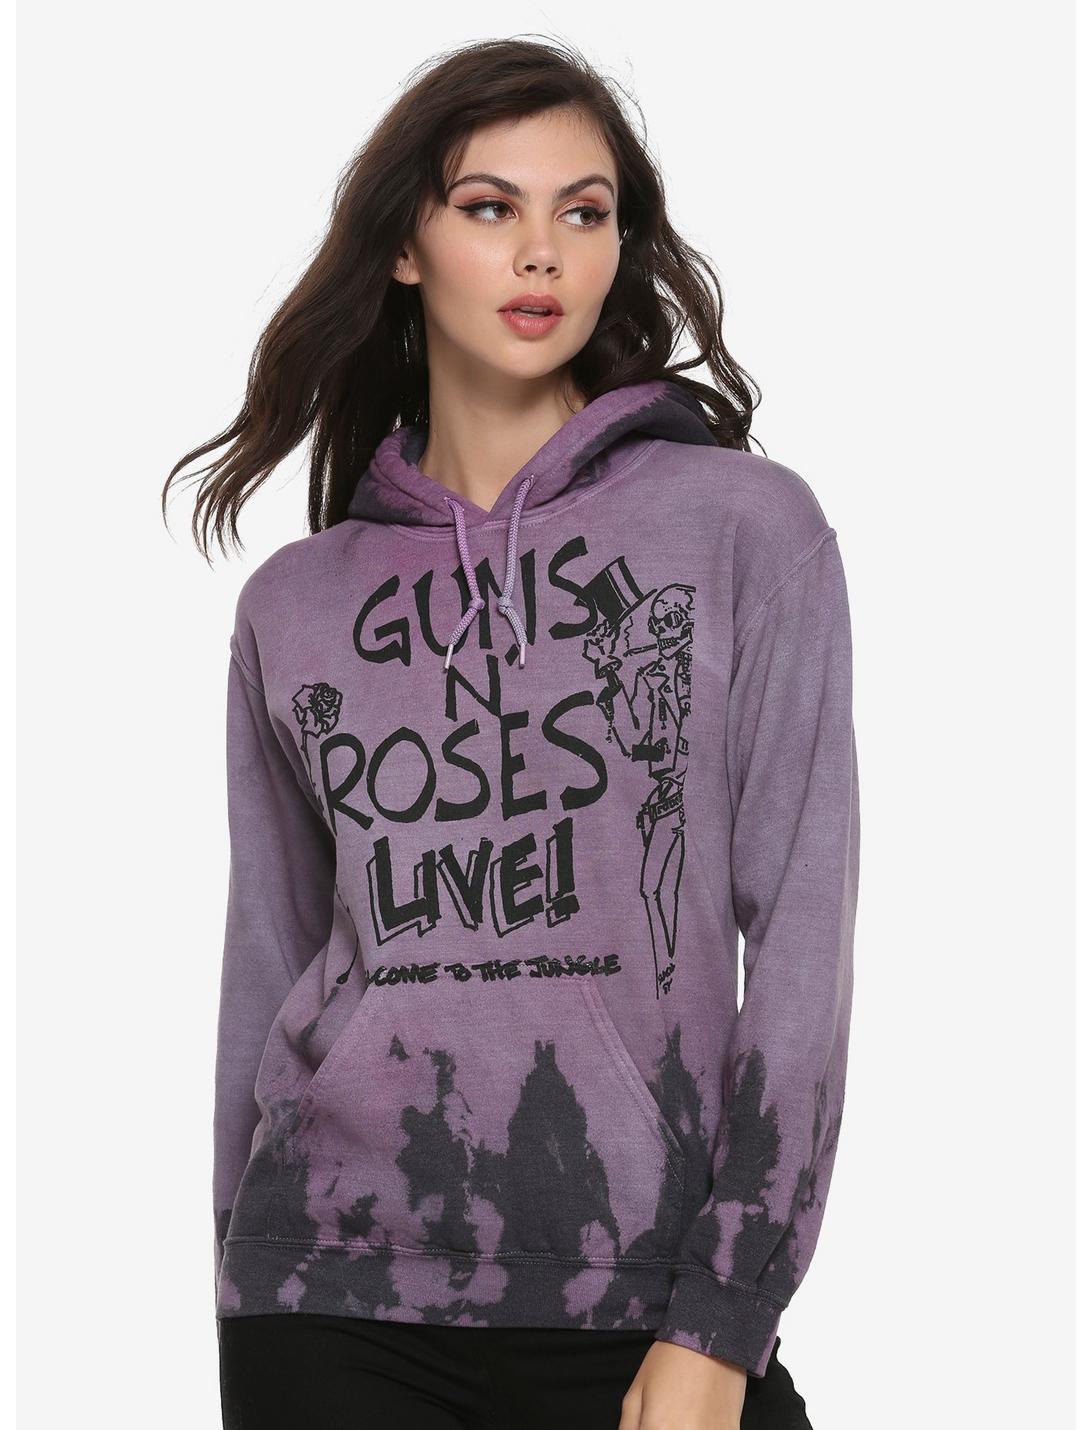 Guns N' Roses Live! Welcome To The Jungle Tie-Dye Girls Hoodie, PINK, hi-res